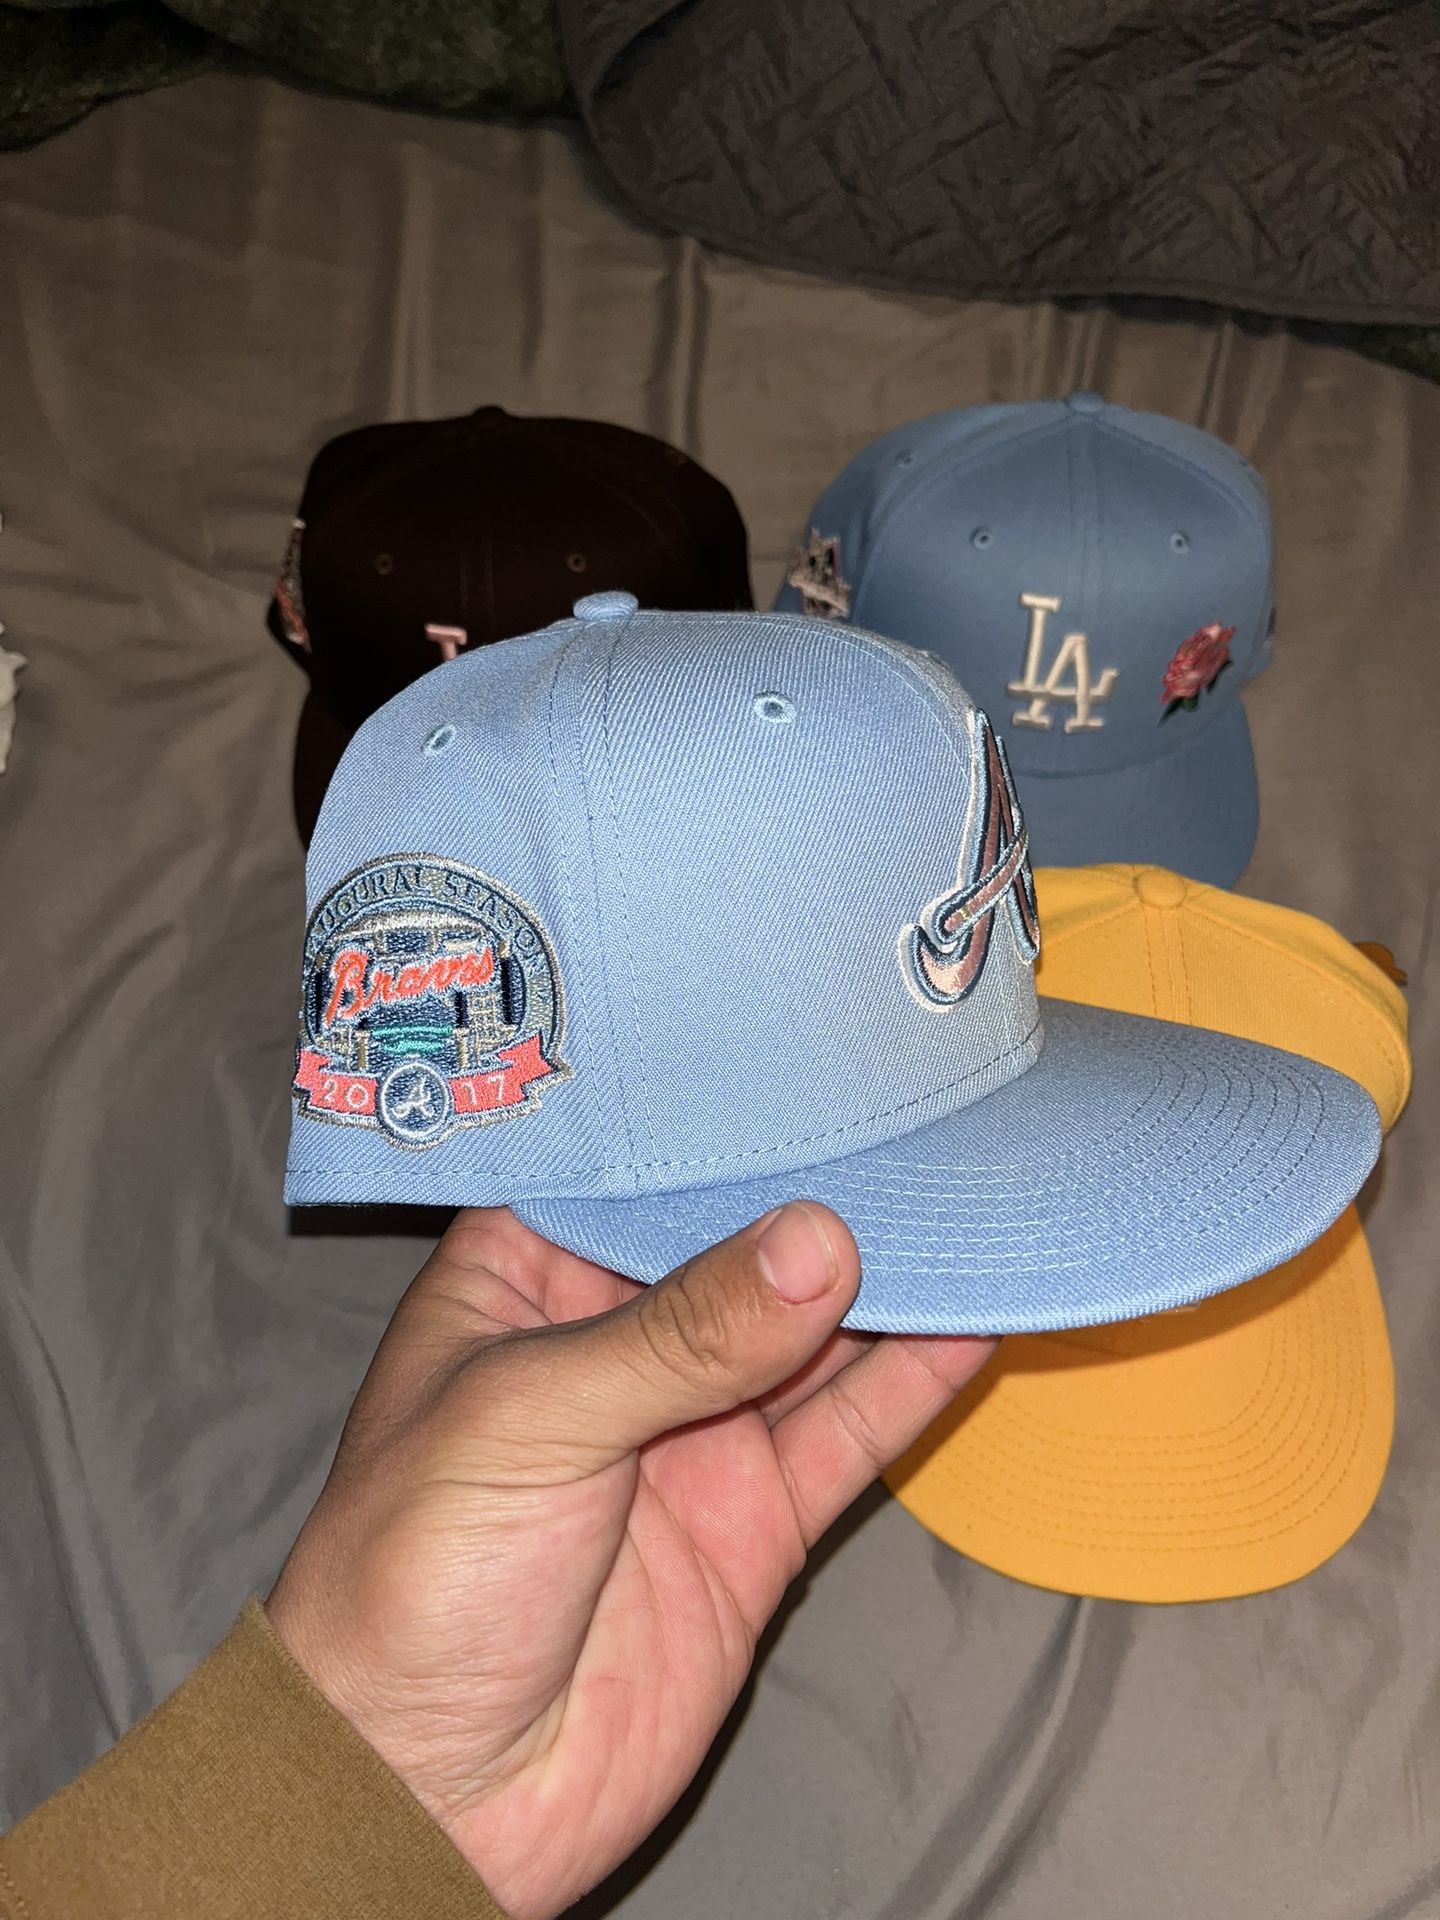 Mag Park Fitted Hat 7 1/4 “Pink Mocha” for Sale in Los Angeles, CA - OfferUp